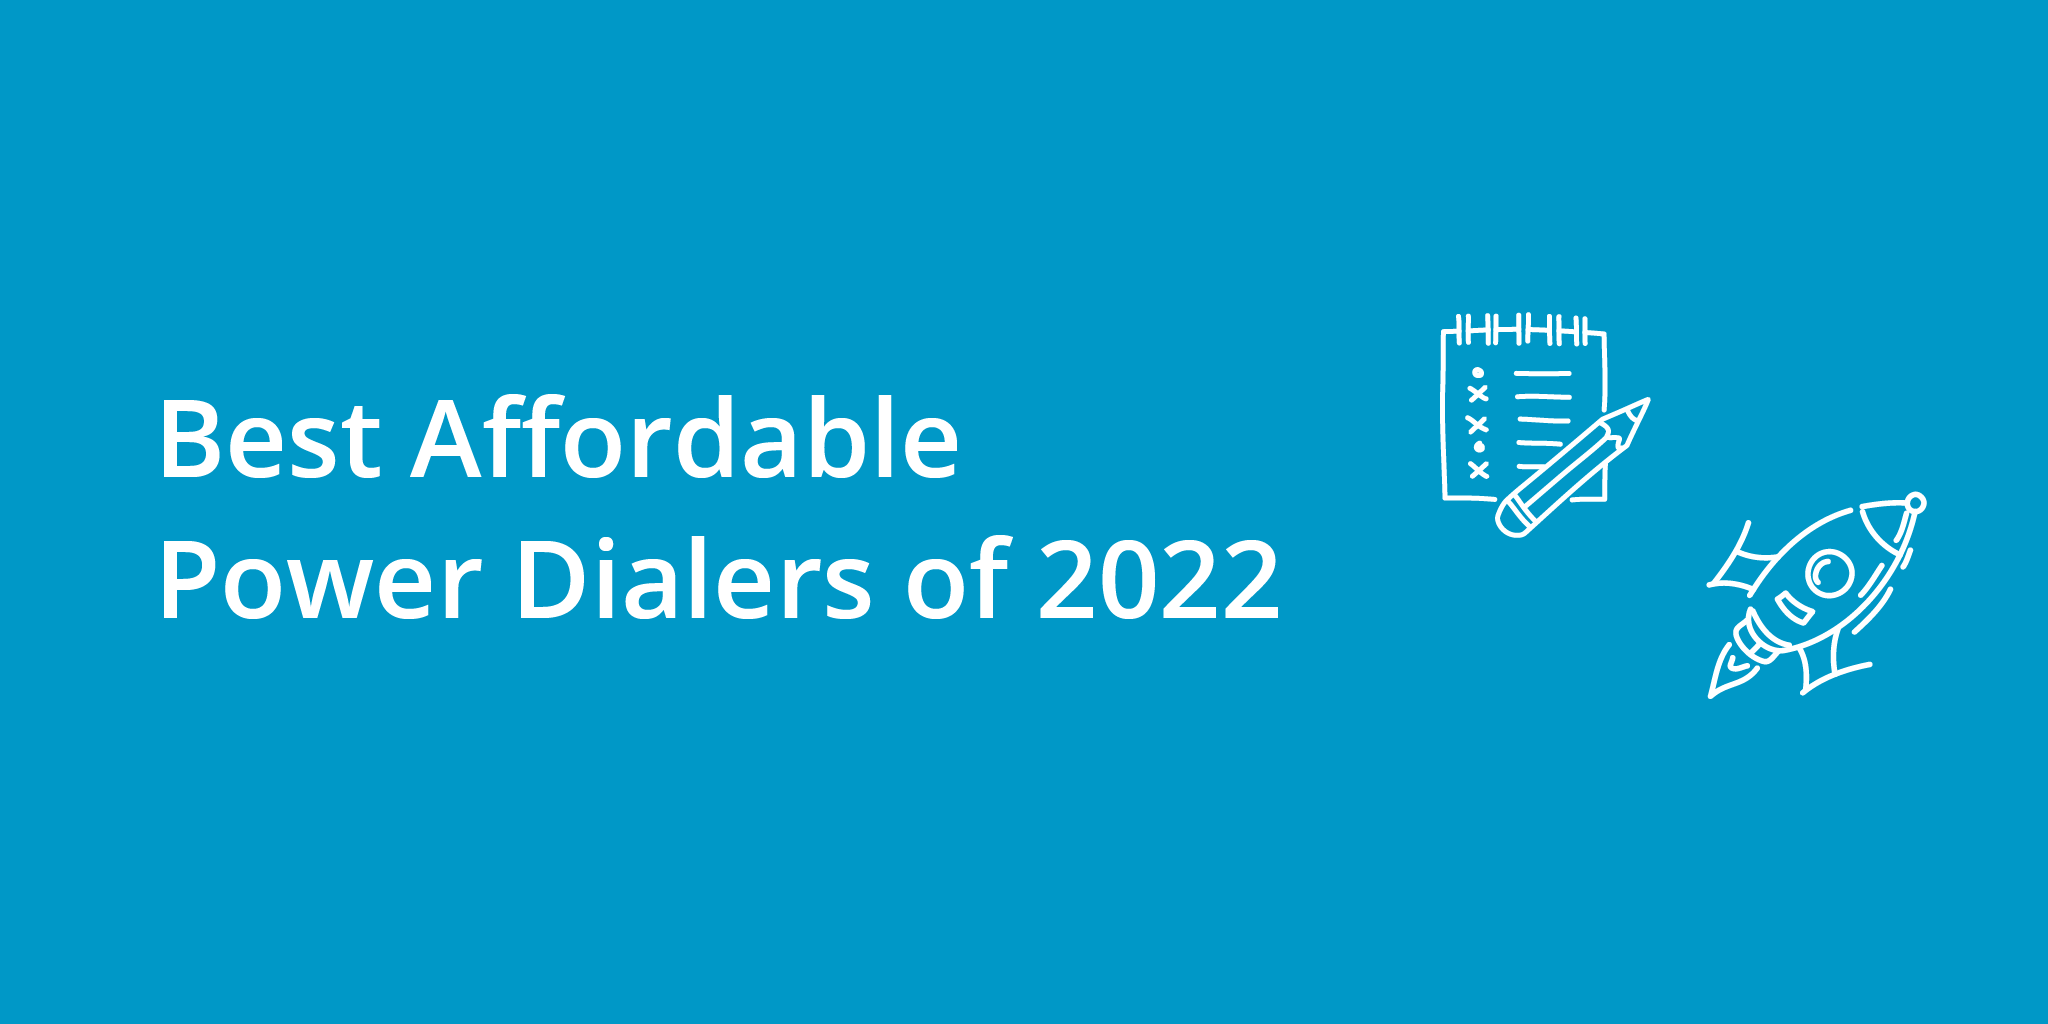 Best Affordable Power Dialers of 2022 | Telephones for business